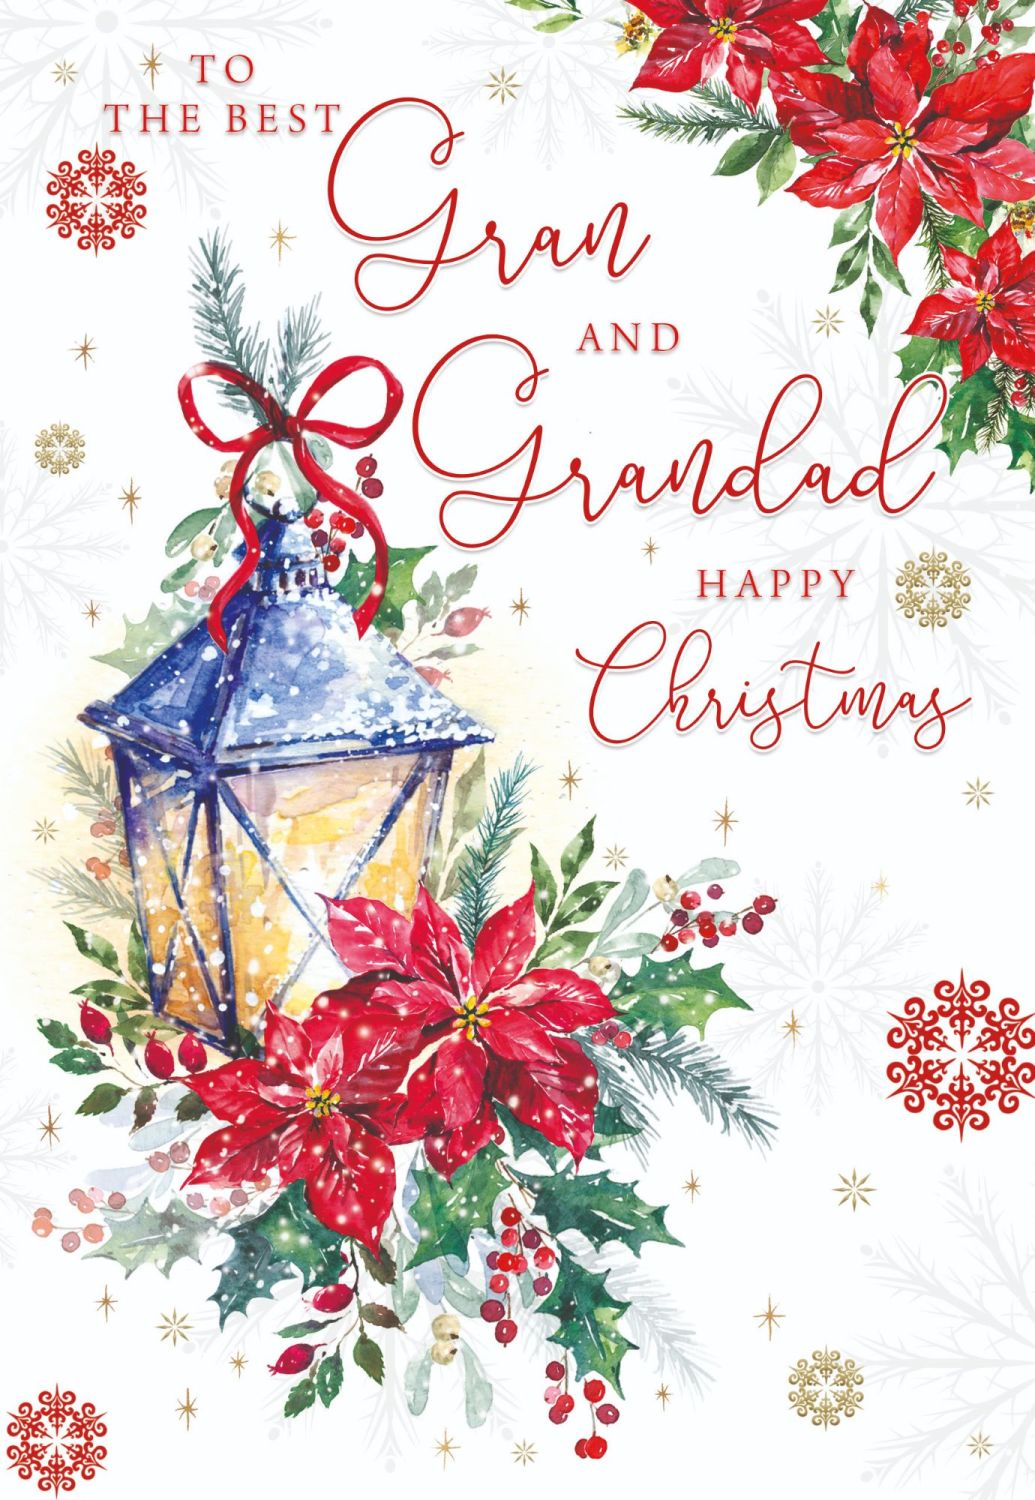 To A Special Gran And Grandad Christmas Card - AT Christmas TIME - Christma